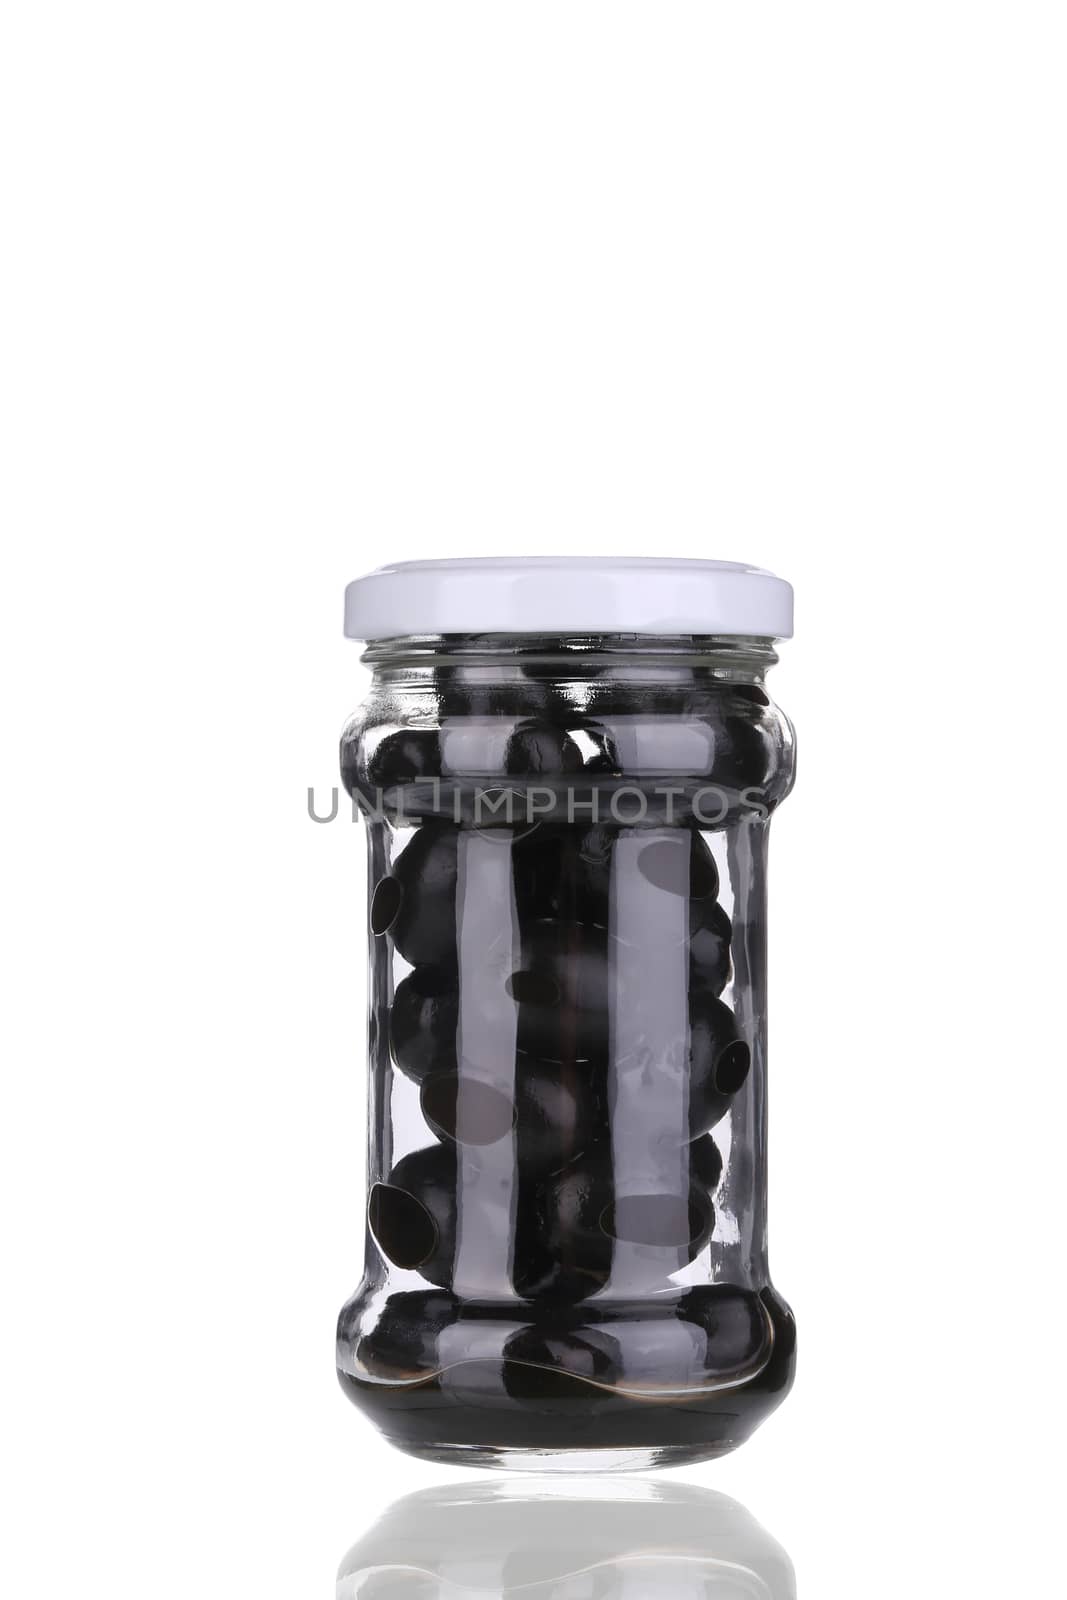 Black olives in a jar. Isolated on a white background.